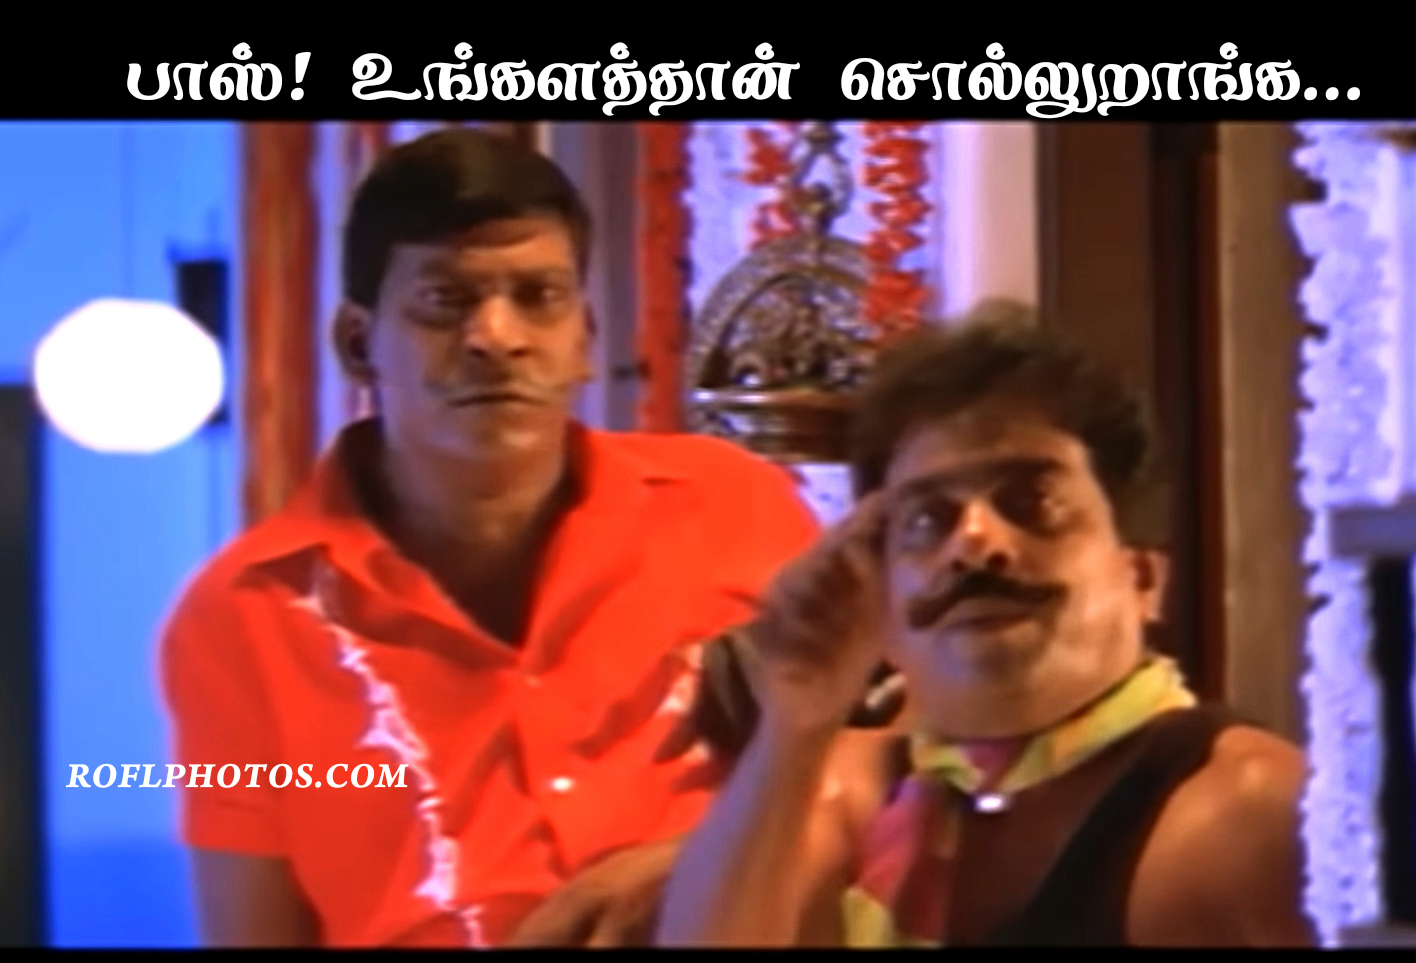 Tamil Funny Memes Videos Download Tamil funny photo comment is a fun application which has more than 1000 funny reactions and photo comments of many comedy actors and heroes. tamil funny memes videos download